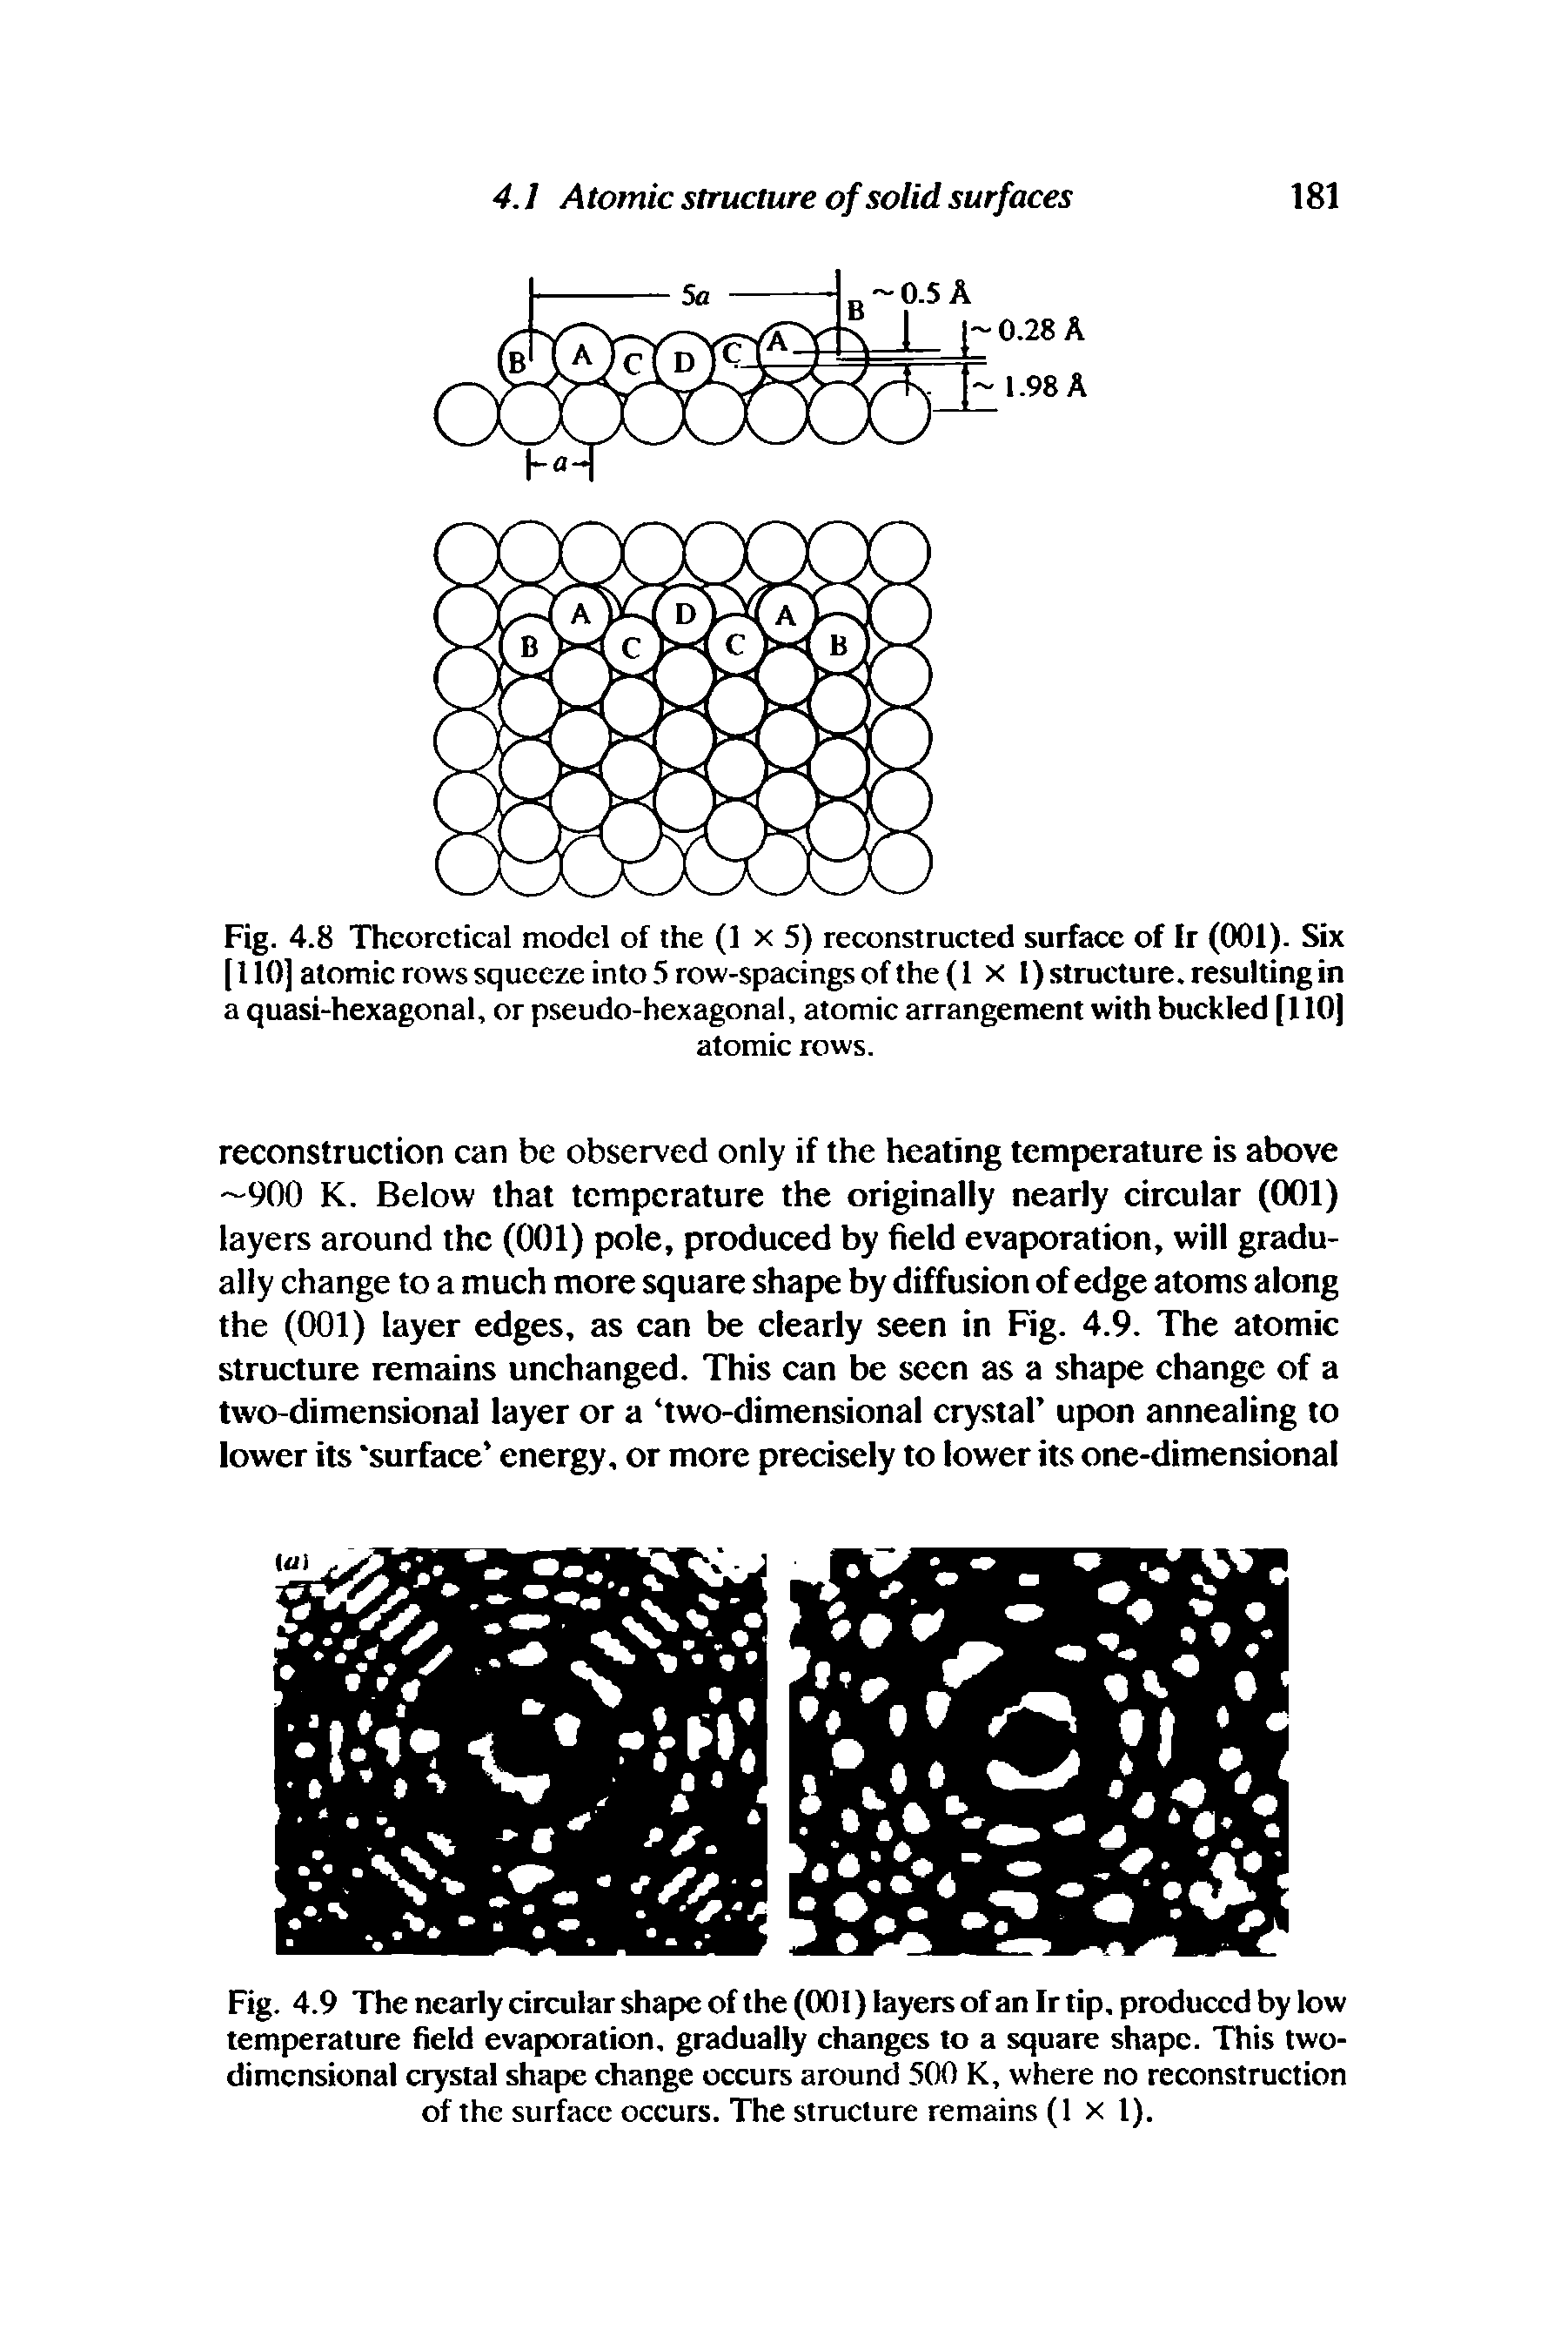 Fig. 4.8 Theoretical model of the (1 x 5) reconstructed surface of Ir (001). Six [110] atomic rows squeeze into 5 row-spacings of the (1 x 1) structure, resulting in a quasi-hexagonal, or pseudo-hexagonal, atomic arrangement with buckled [110]...